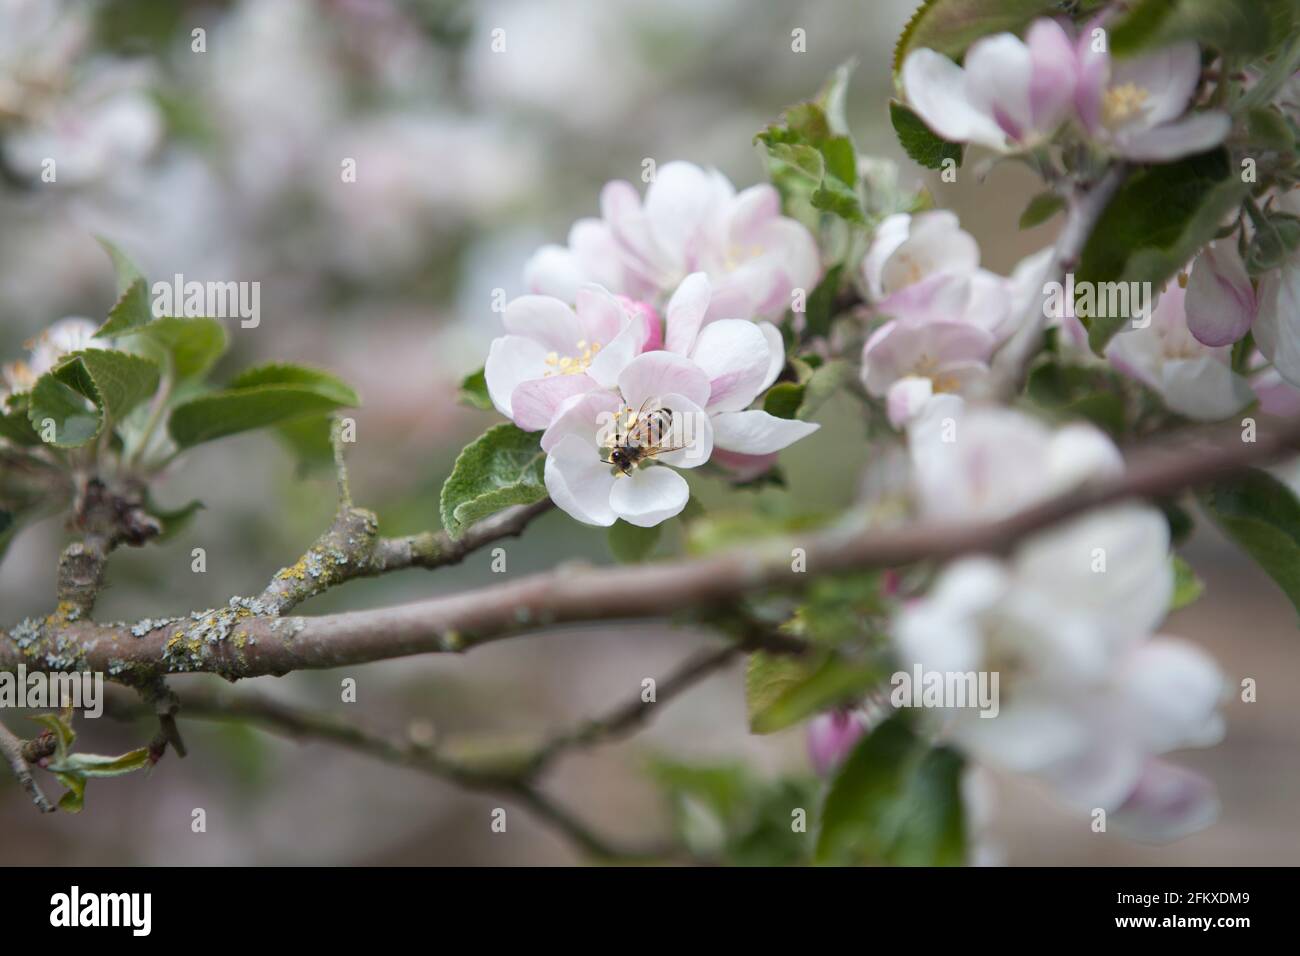 The European honey bee (western honey bee) Apis mellifera pollinates apple blossom (Malus domestica) of the variety 'Bedfordshire foundling'. Spring Stock Photo